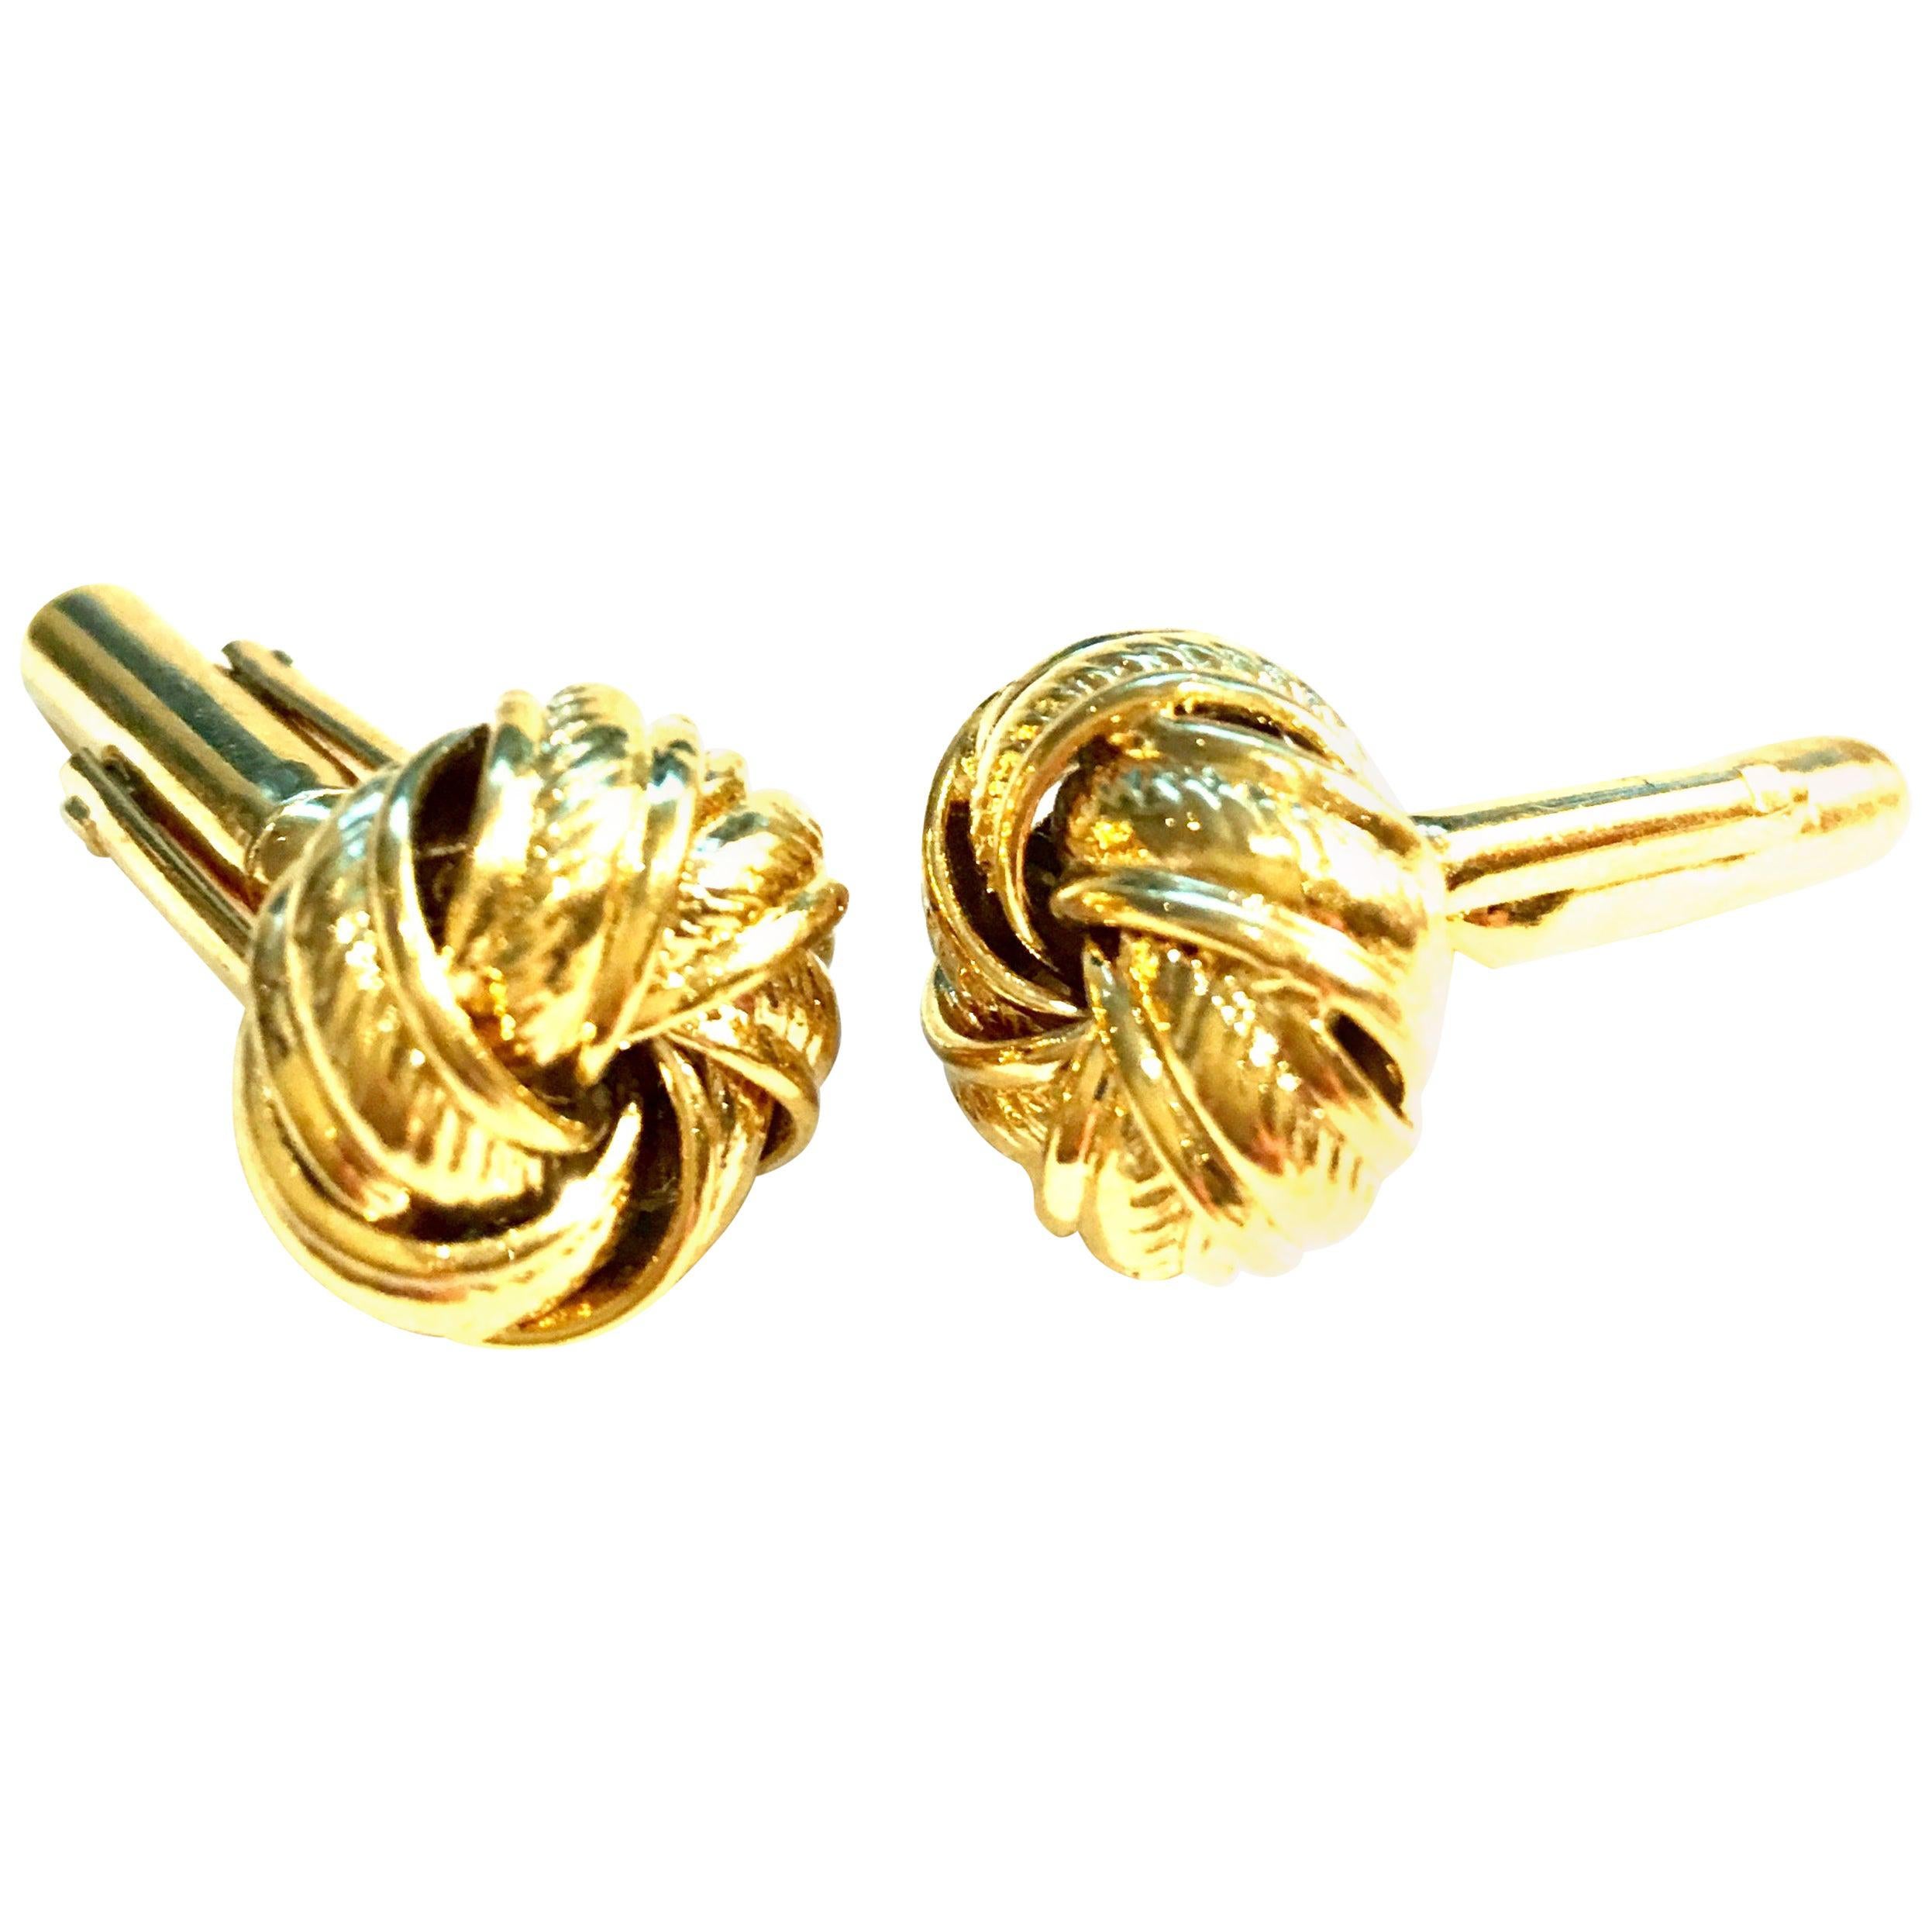 20th Century Pair Of Gold Plate "Love Knot" Cufflinks For Sale